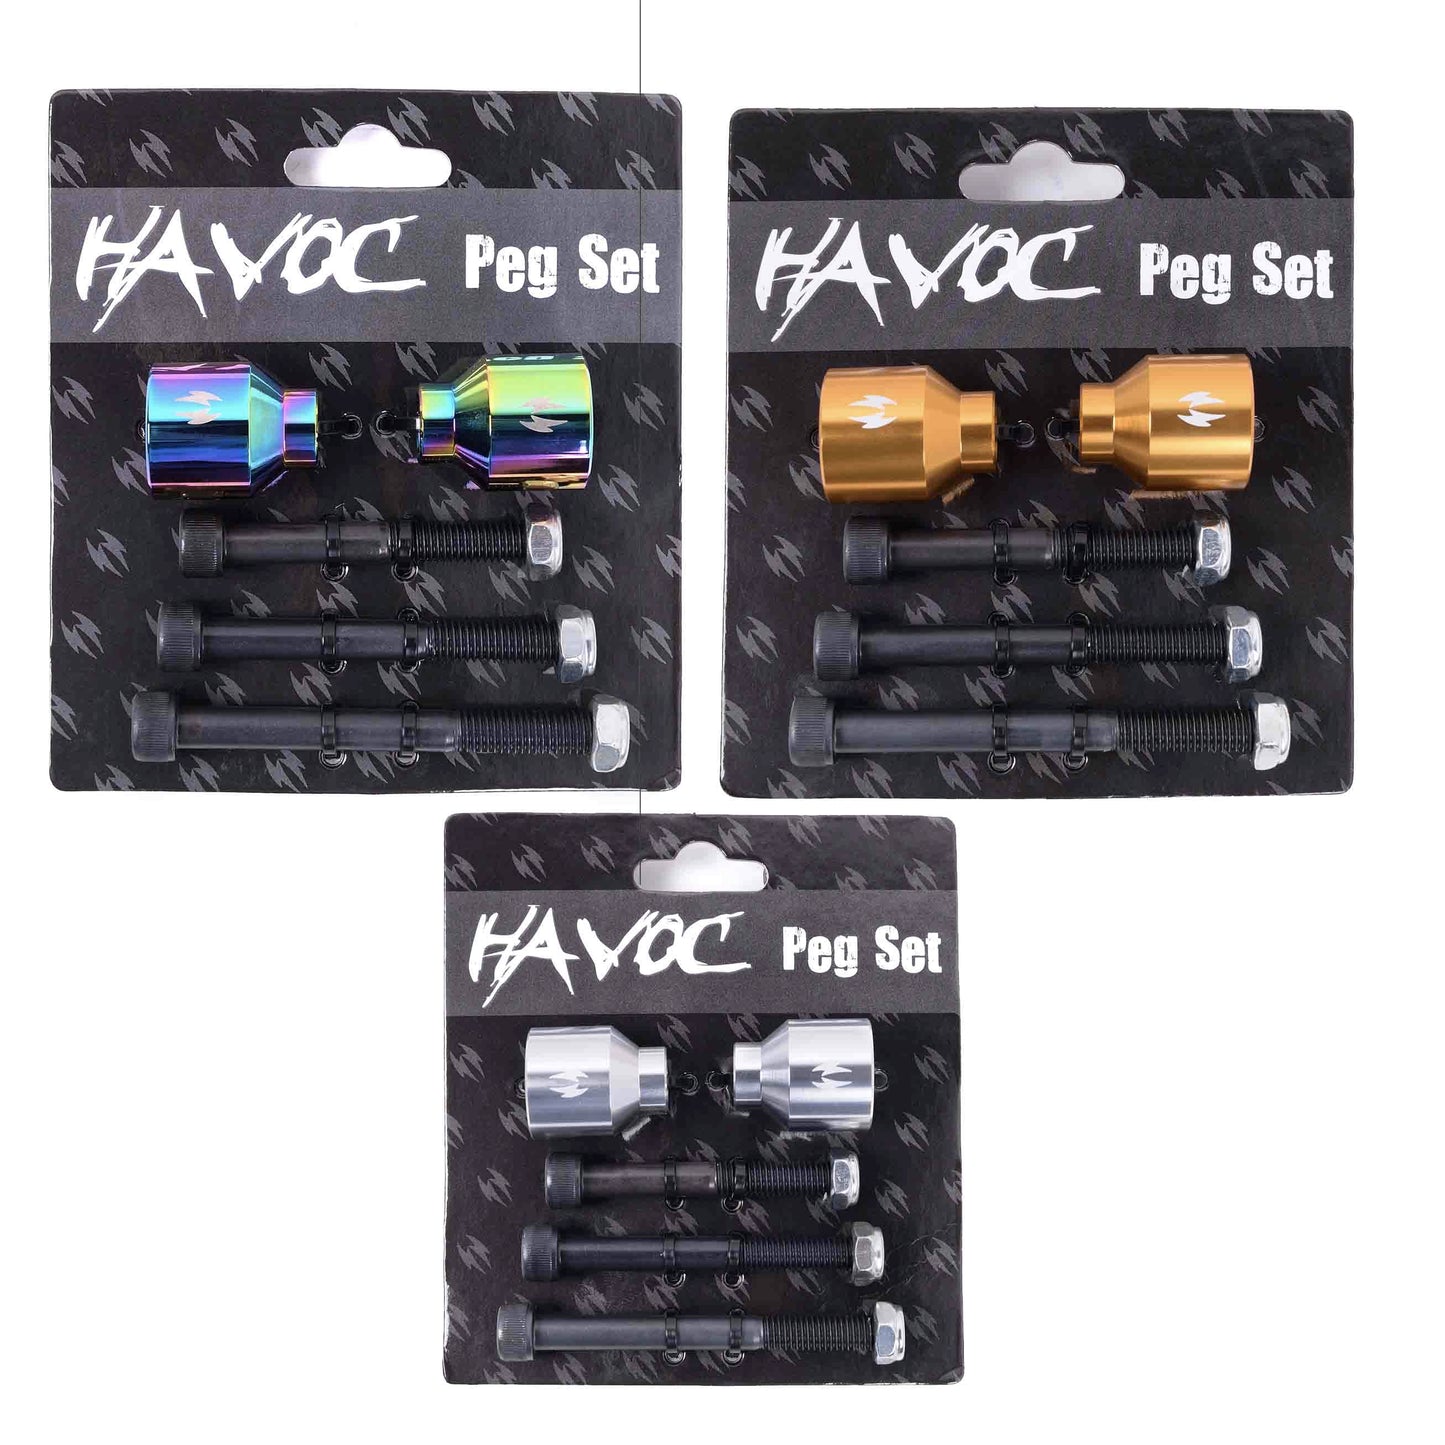 HAVOC STUBBY SCOOTER PEGS